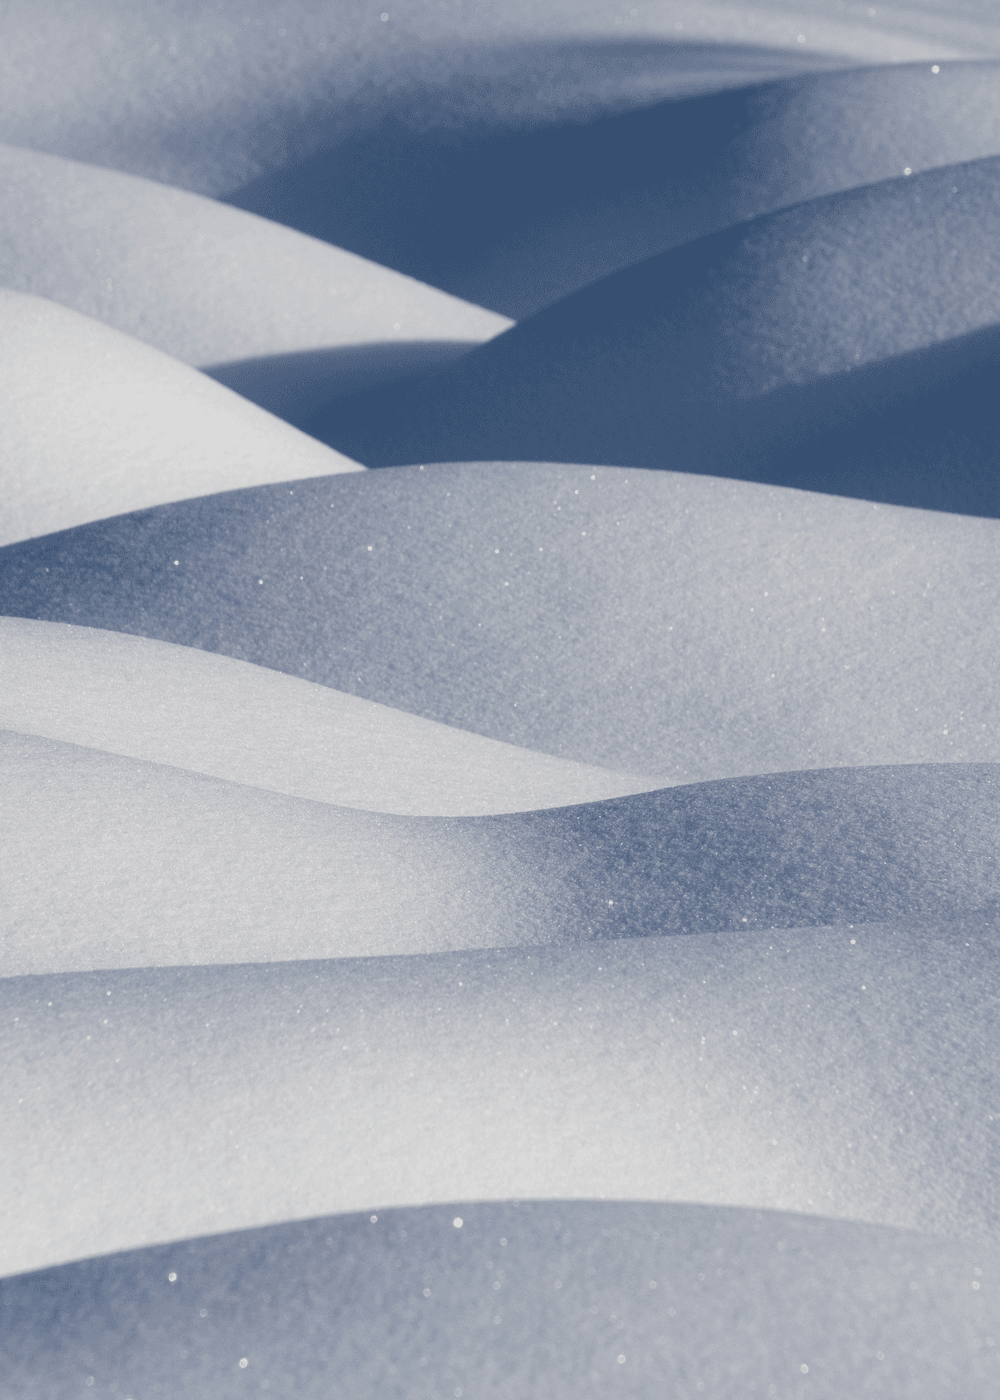 Abstracts in Snow